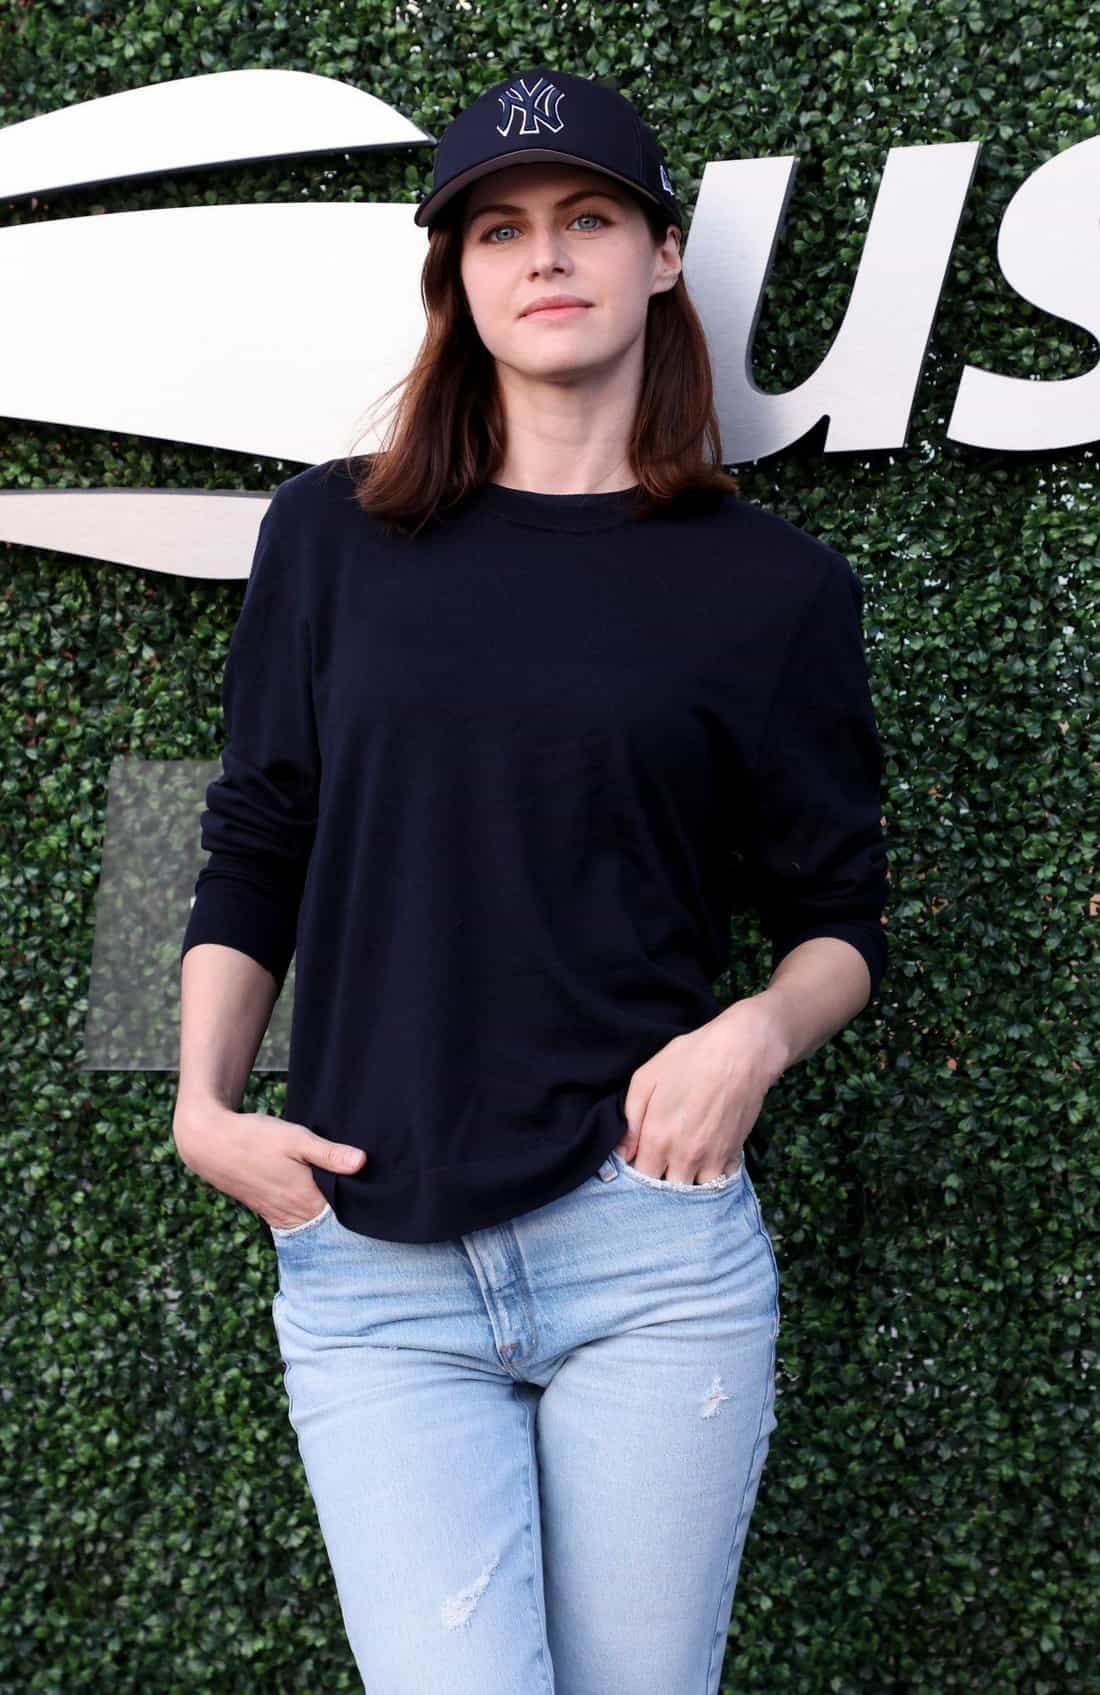 Alexandra Daddario Charms in Casual Look at US Open 2022 in NYC